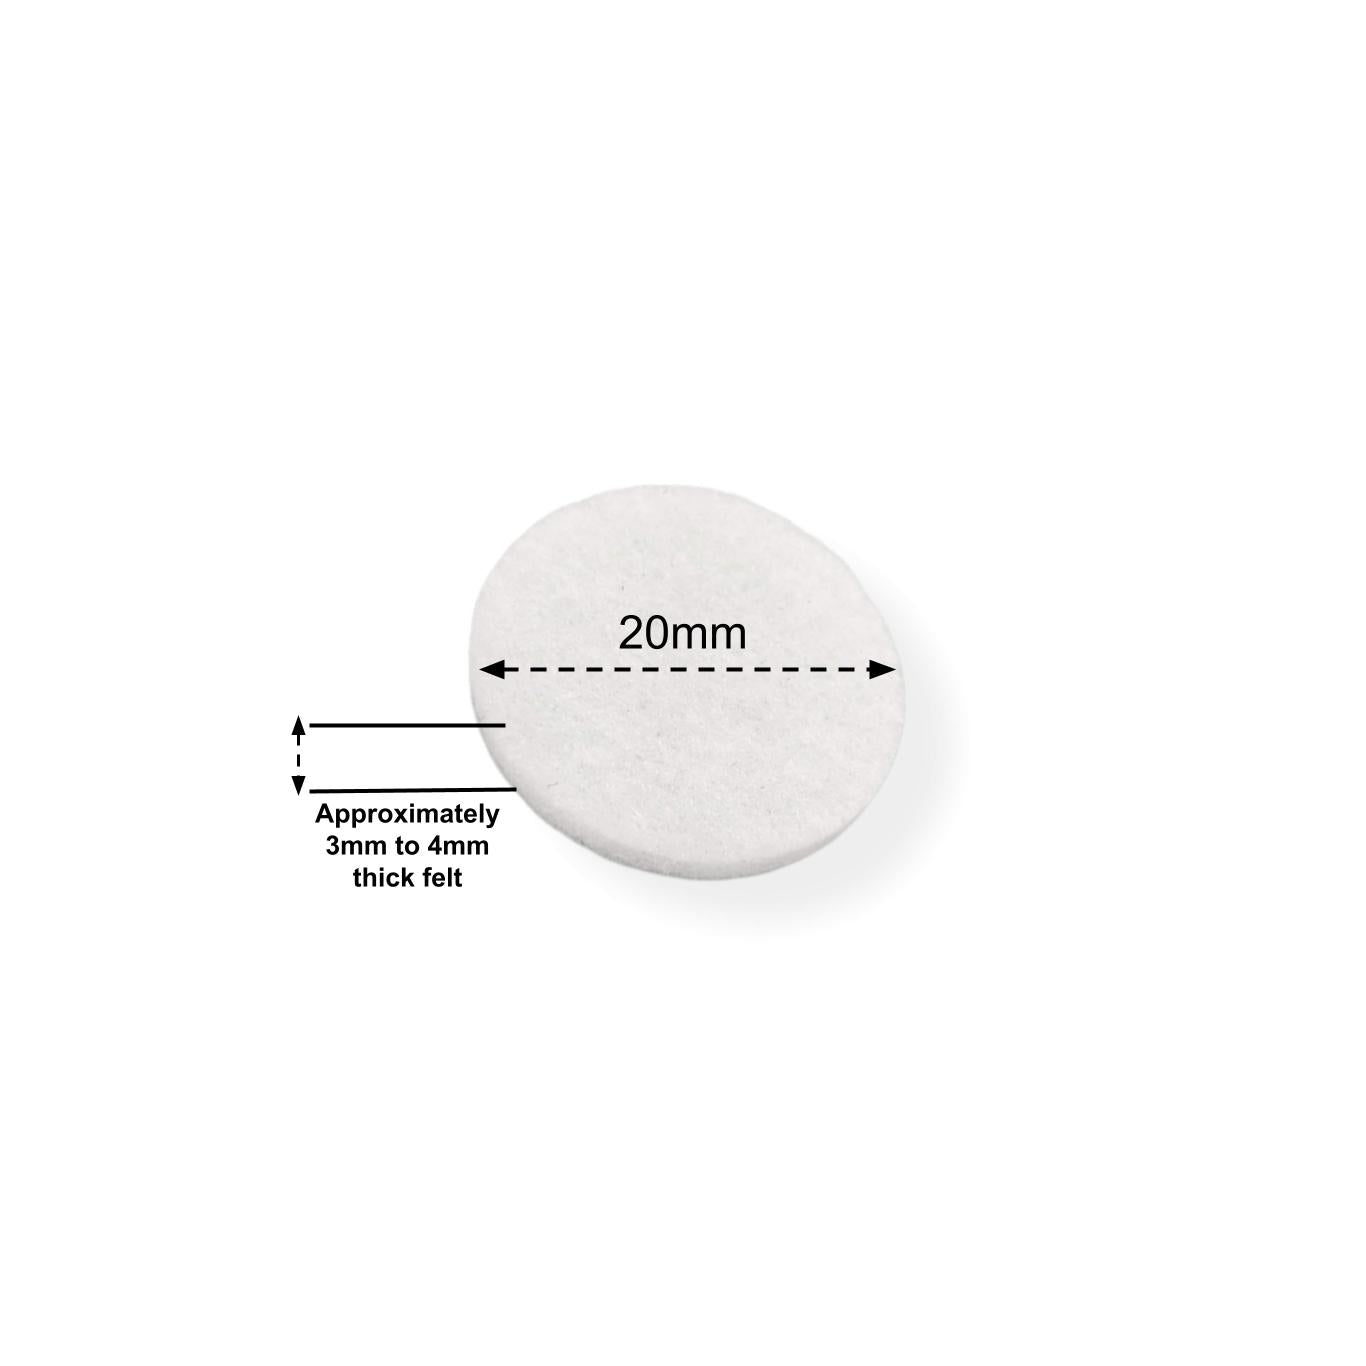 Felt Pads - White Self Adhesive Stick on Felt - Round 20mm Diameter - Made in Germany - Keay Vital Parts